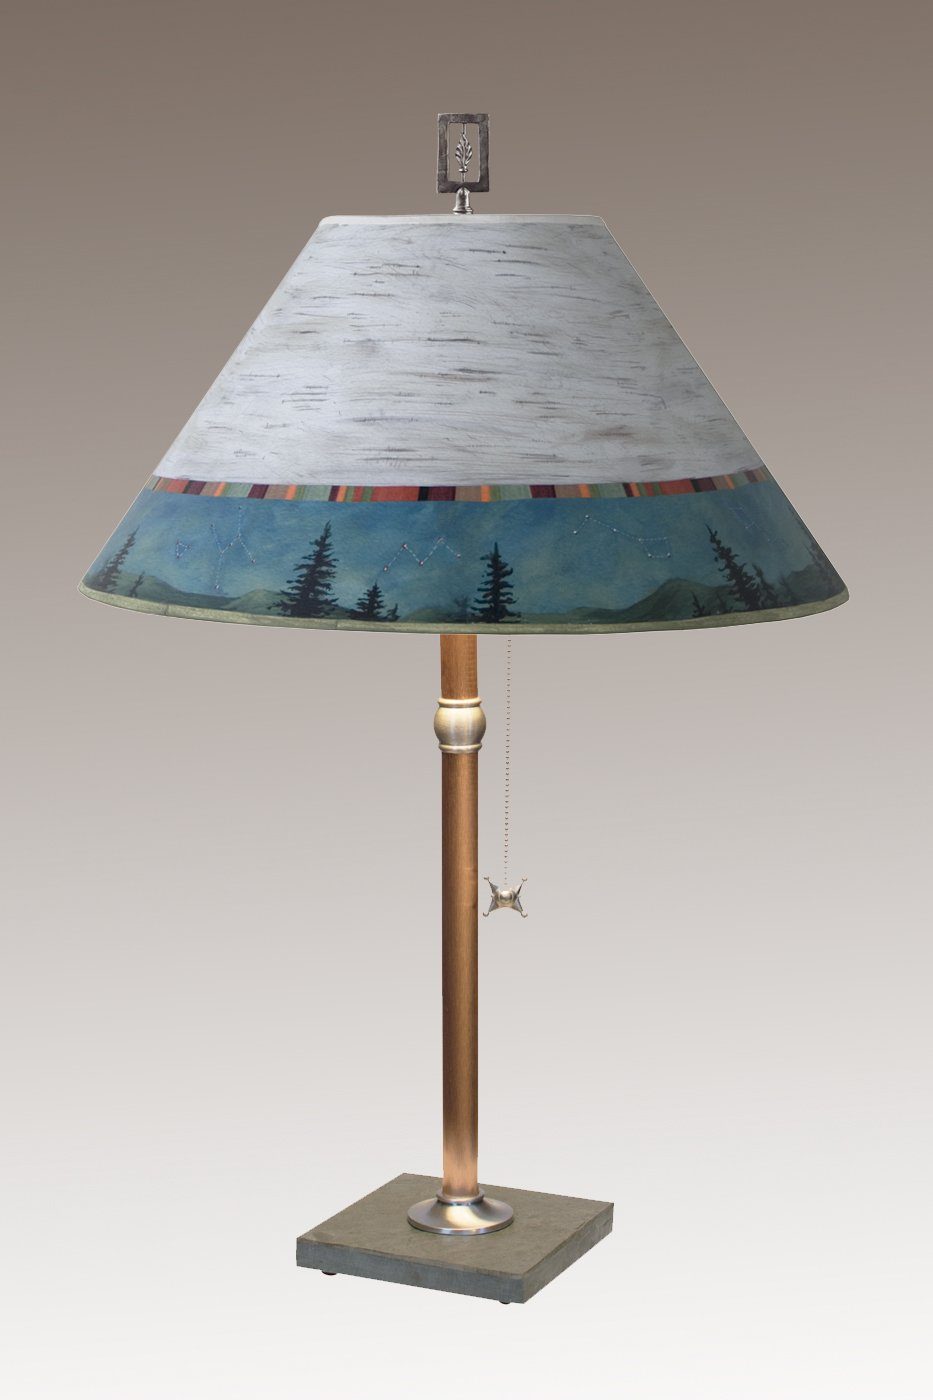 Janna Ugone & Co Table Lamps Copper Table Lamp with Large Conical Shade in Birch Midnight